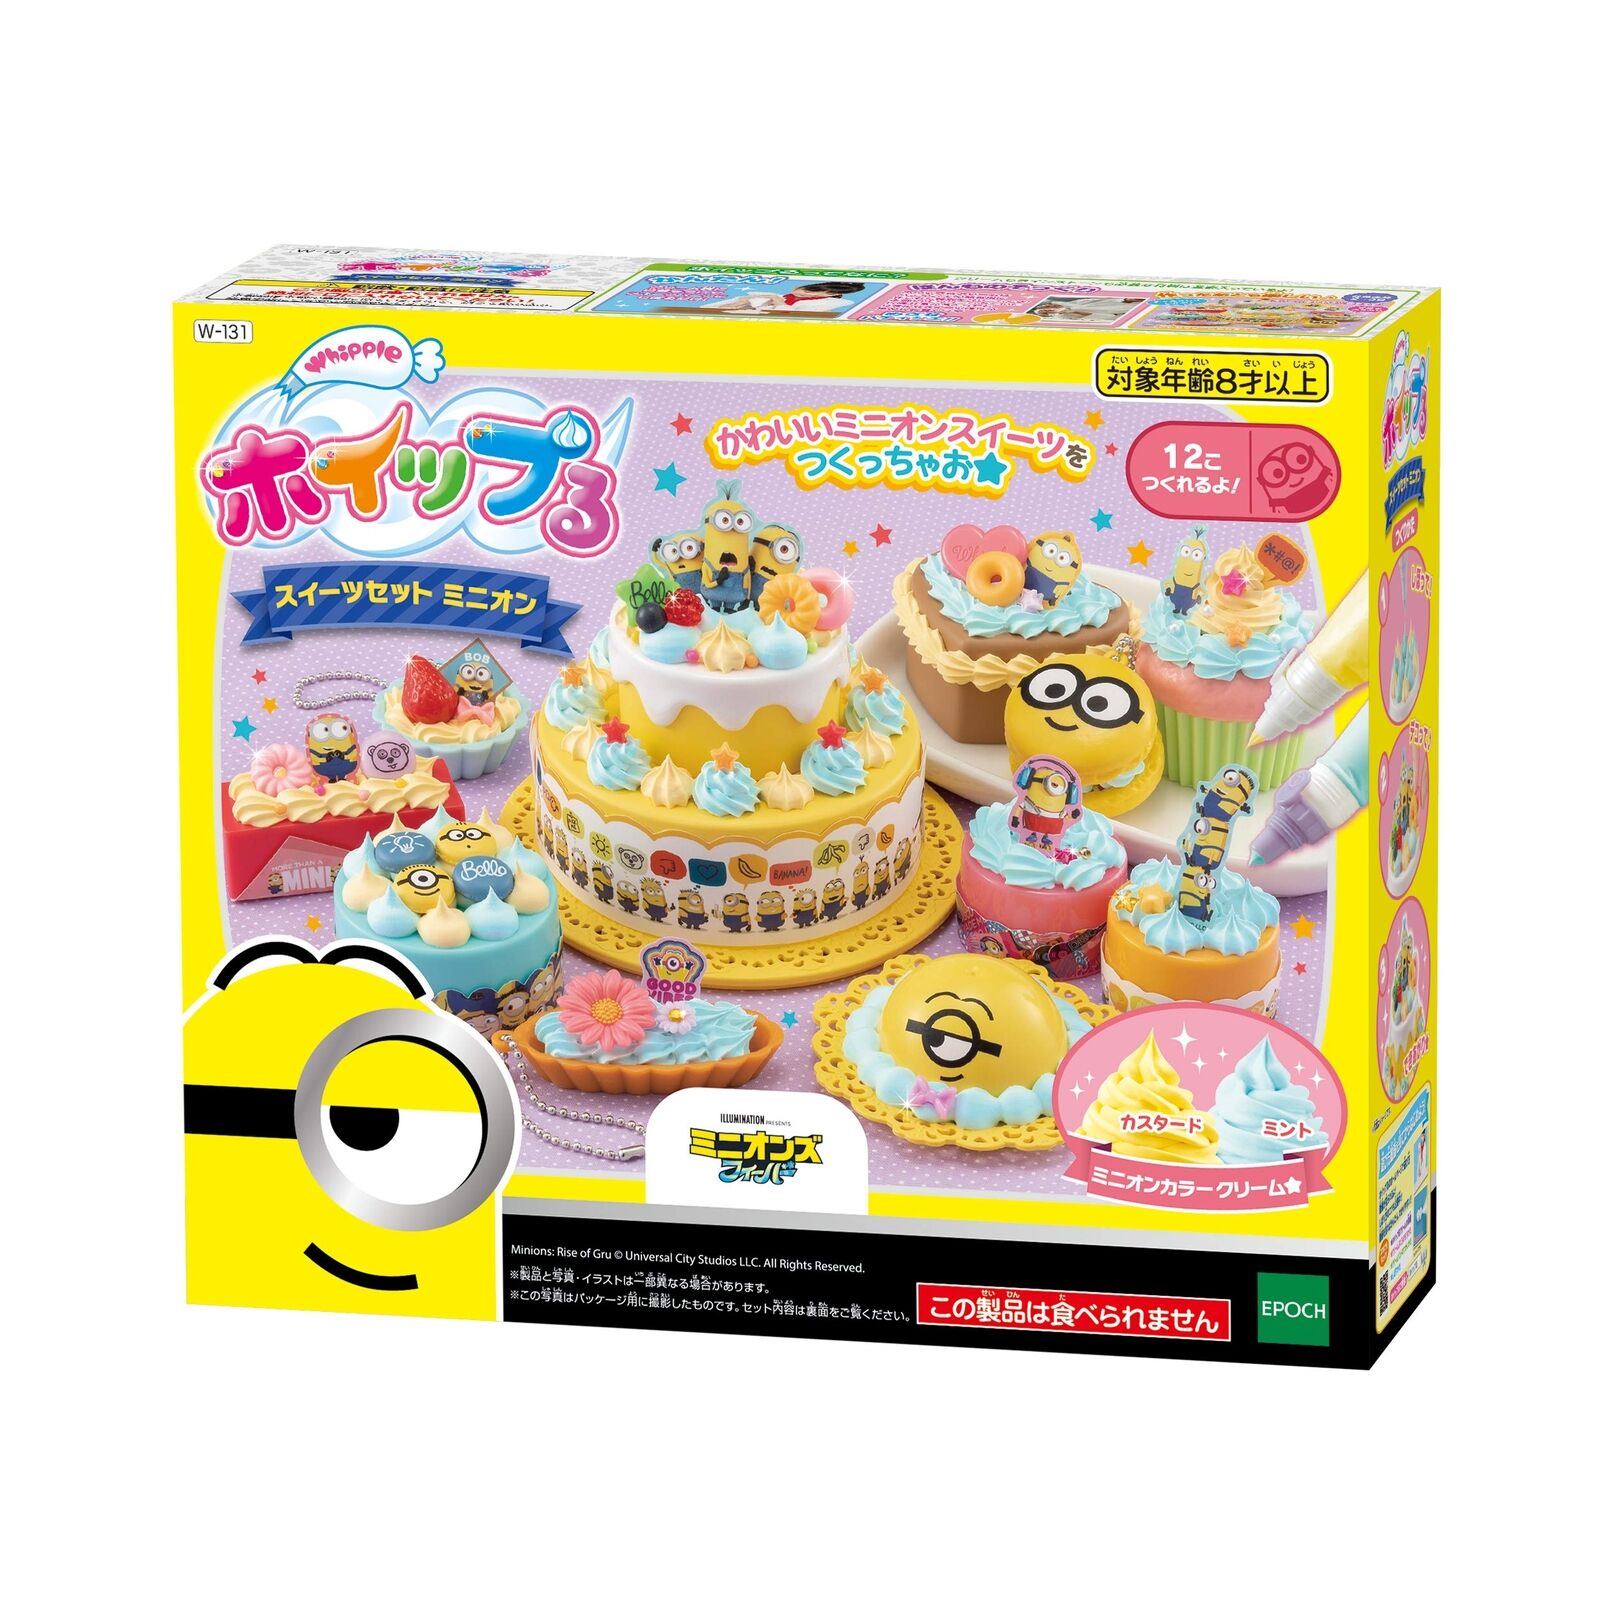 Epoch Whippuru Character Sweets Set Minion Making Toy W-131 Multicolor